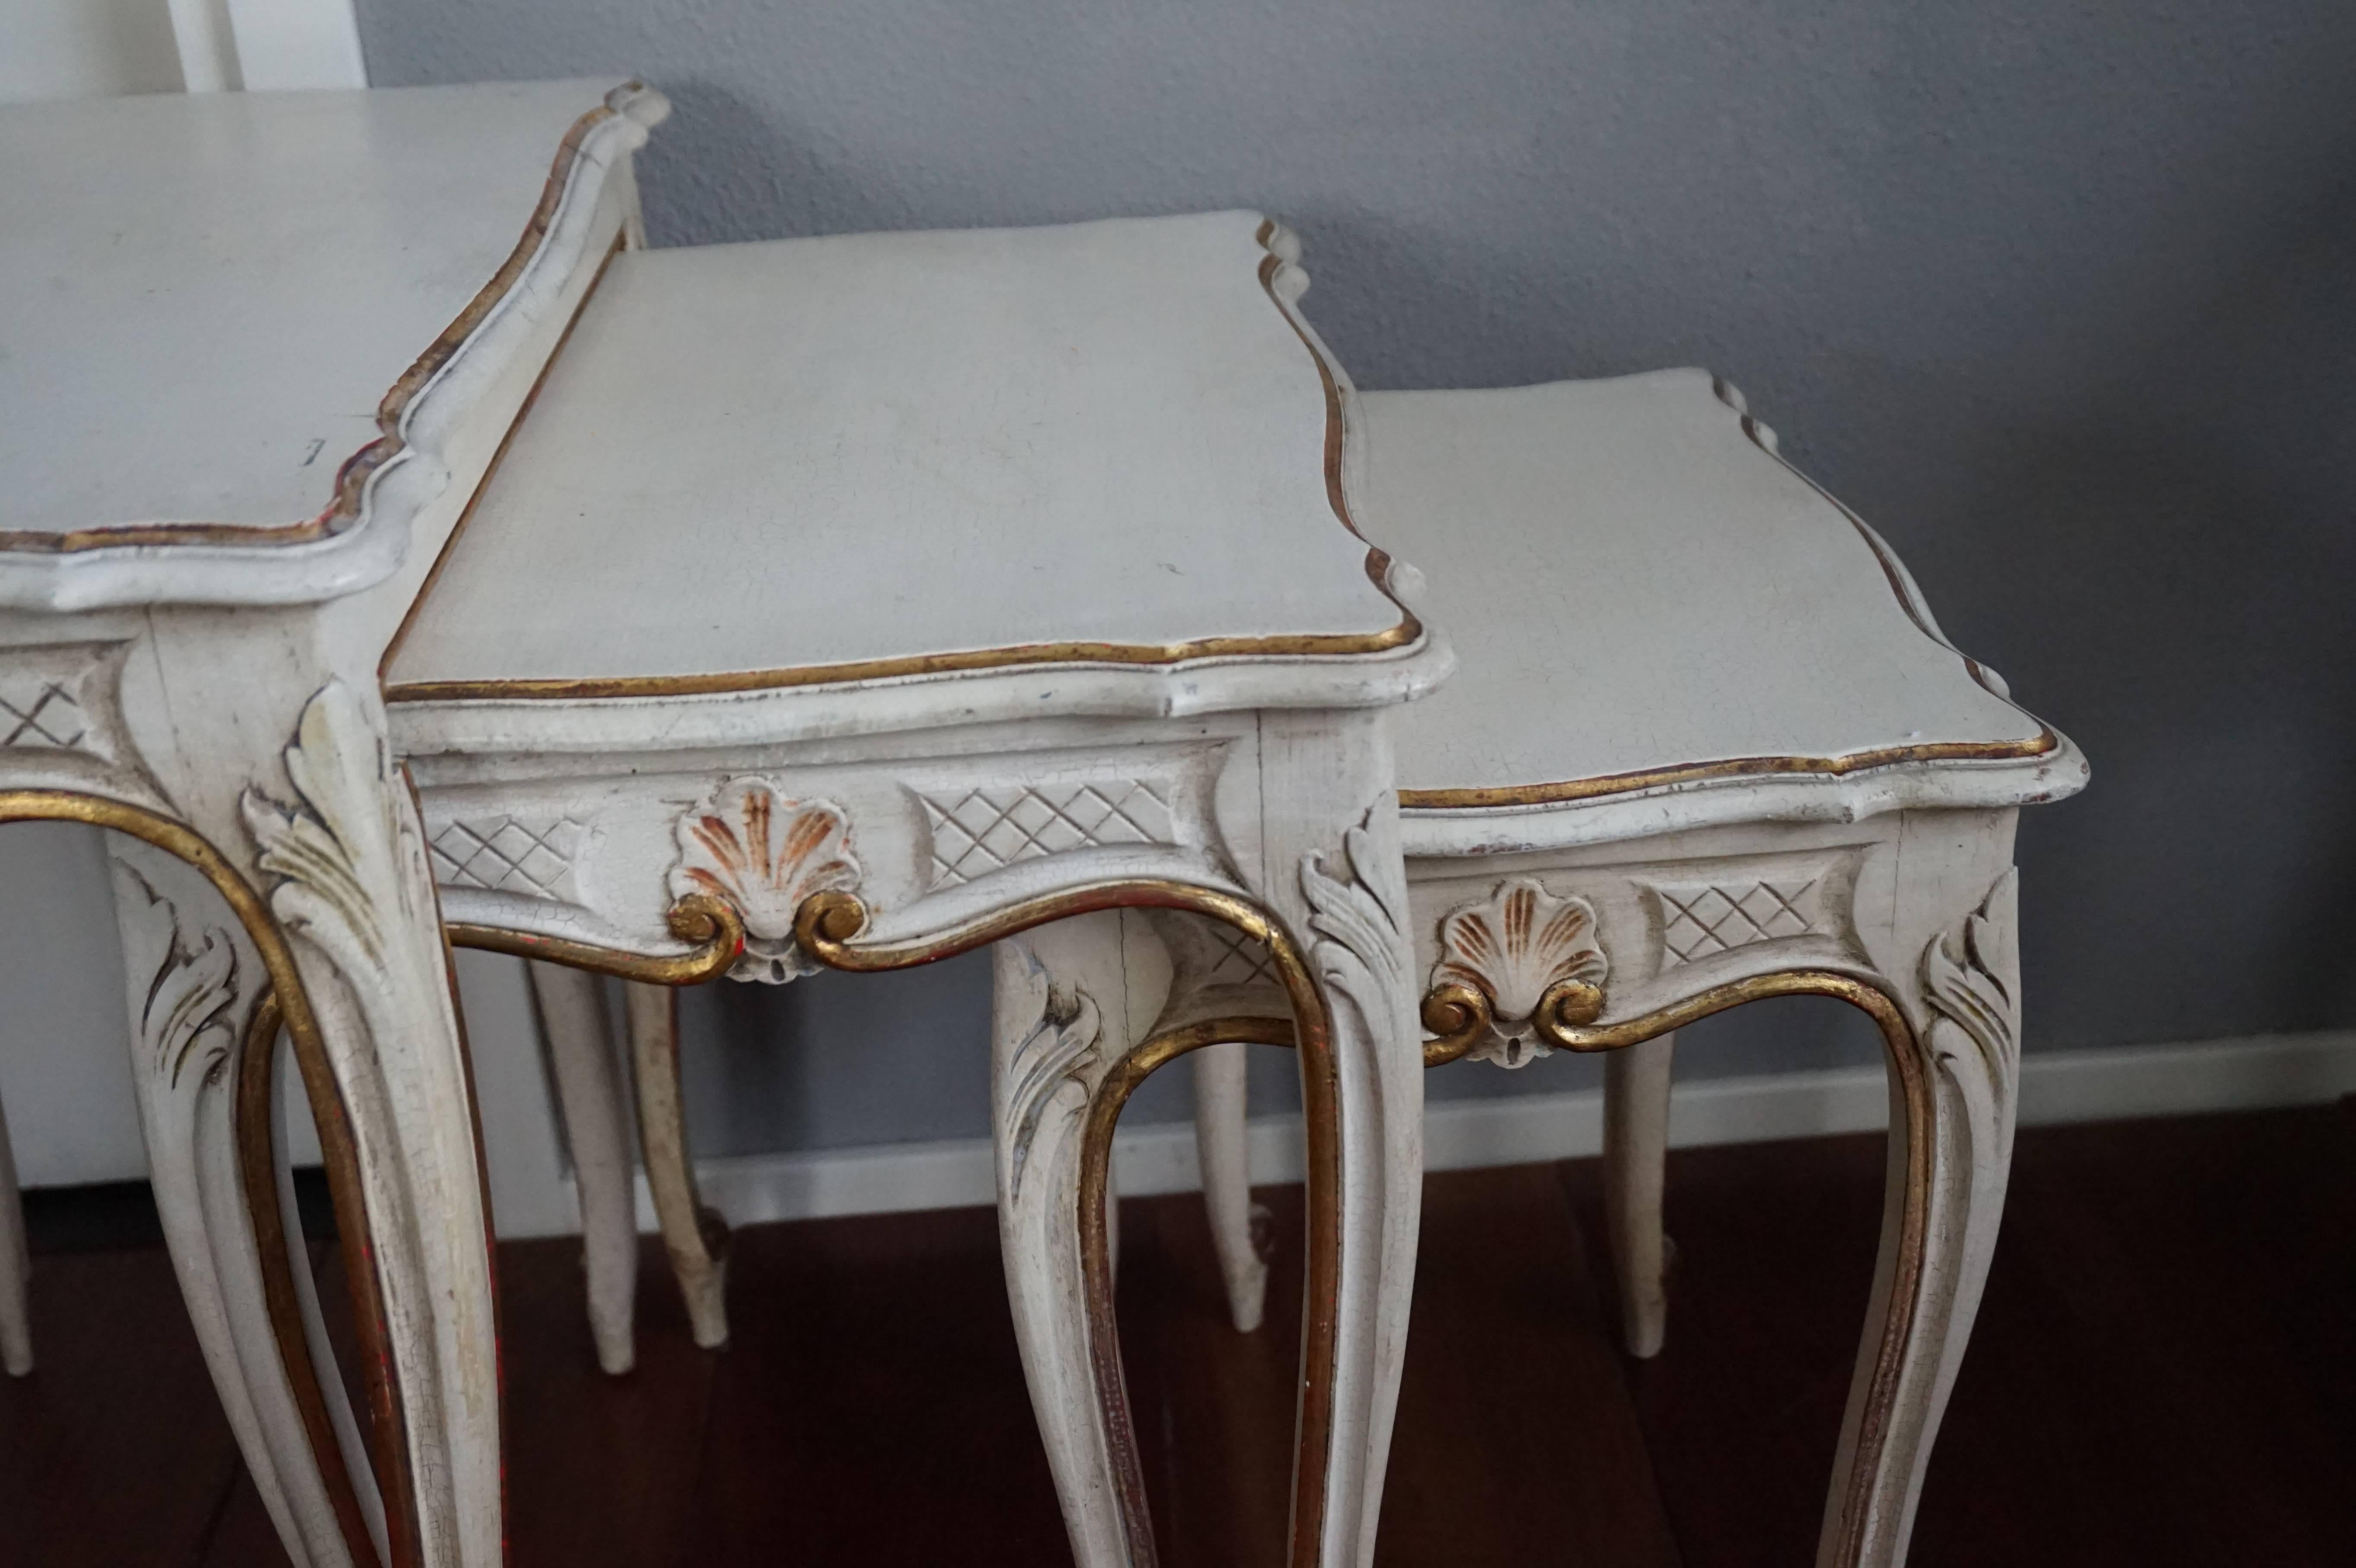 Wood Early 20th Century Italian or French Nest of Tables in Beige-White with Gilding